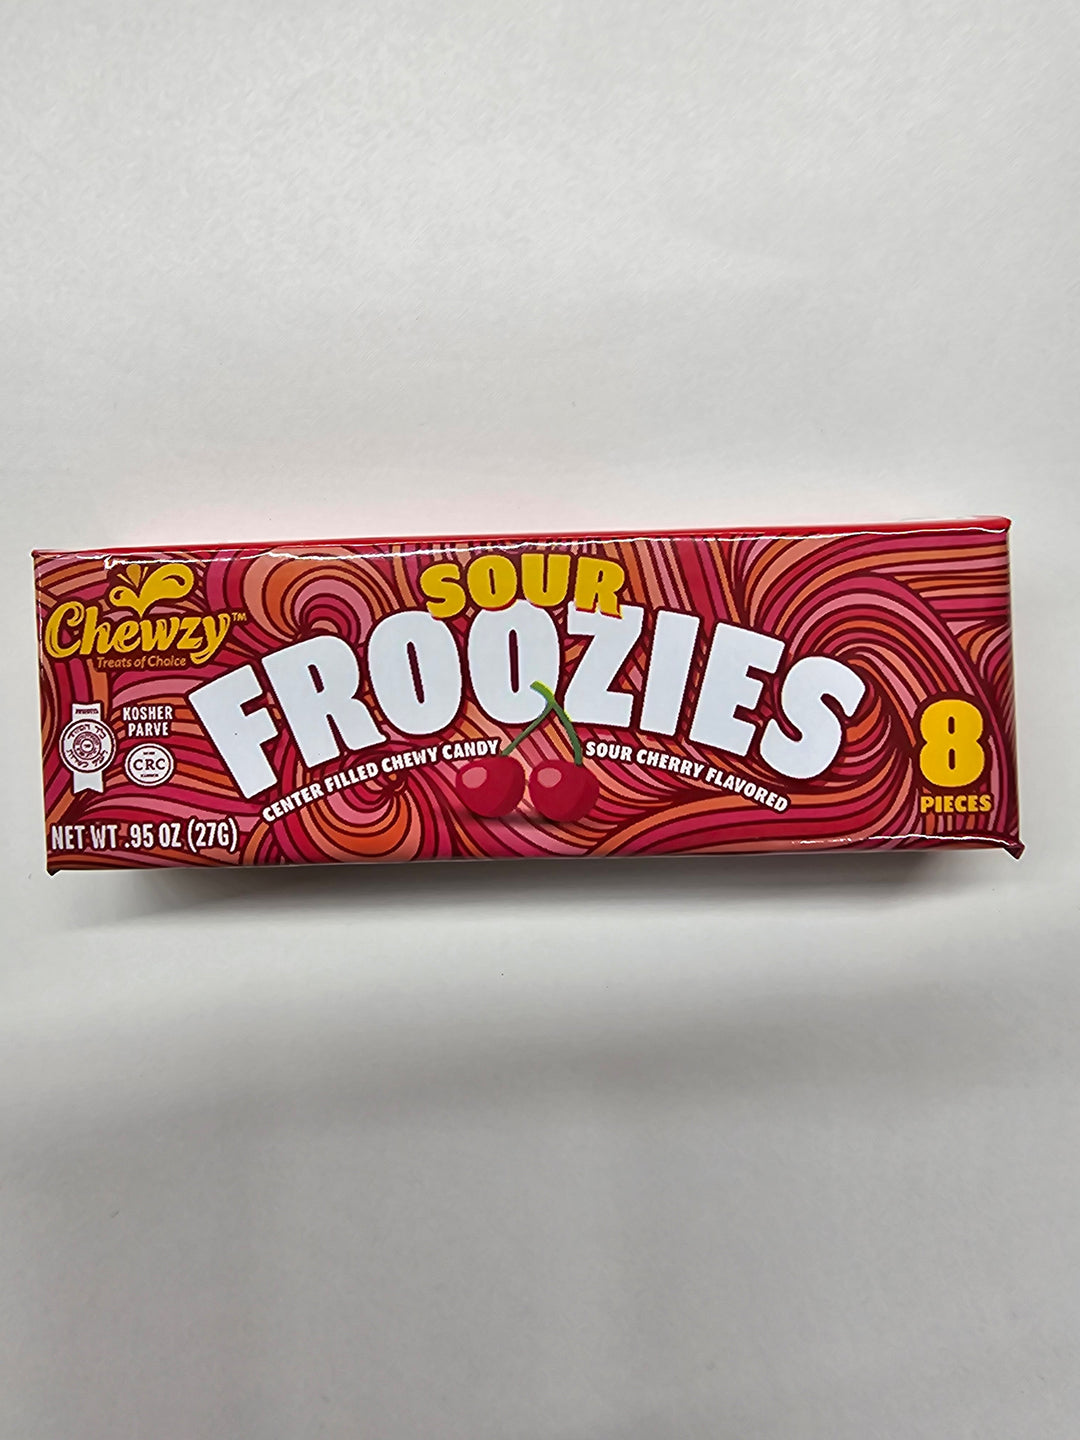 Chewzy, Sour Froozies Sour Cherry Flavored 8 Pieces